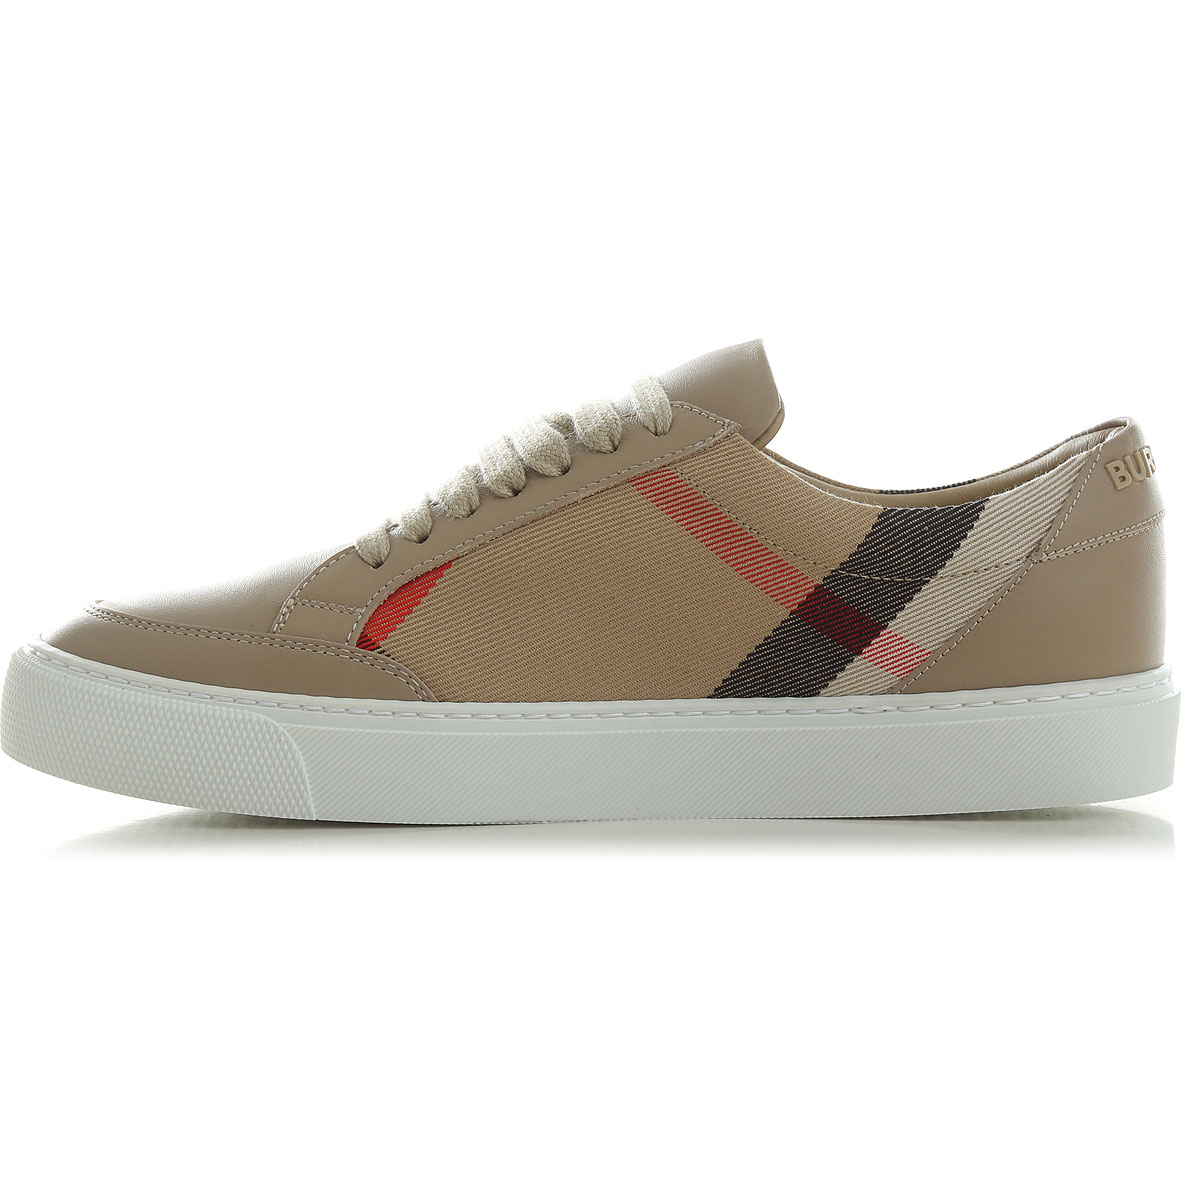 Womens Shoes Burberry, code: 8024330-a1363-